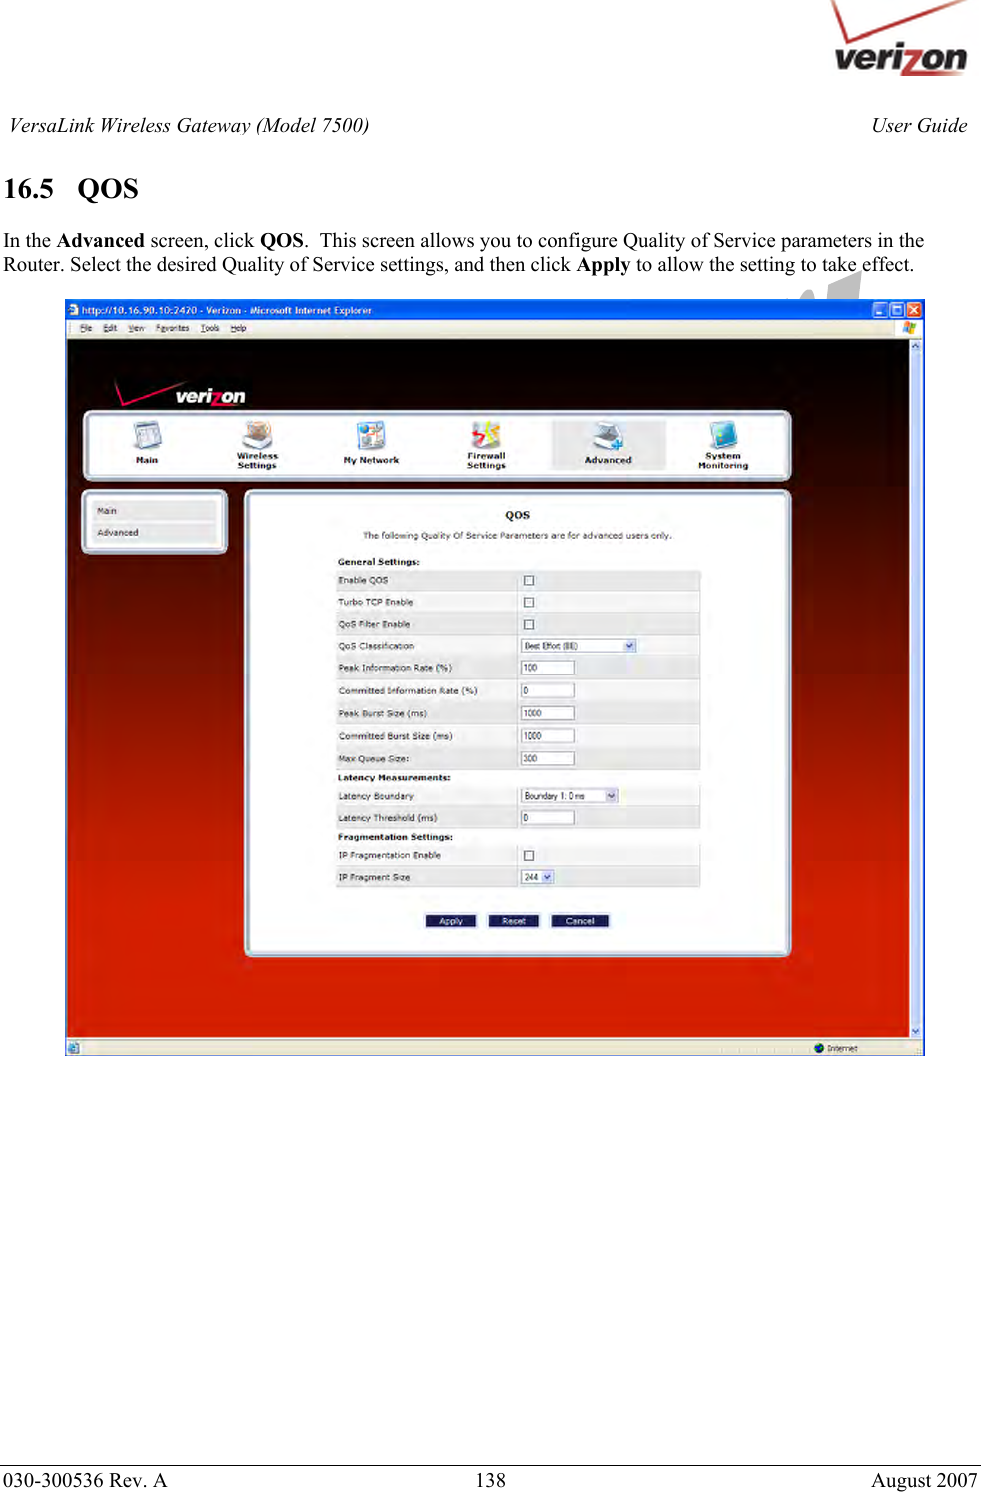       030-300536 Rev. A  138       August 2007 User GuideVersaLink Wireless Gateway (Model 7500) 16.5   QOS  In the Advanced screen, click QOS.  This screen allows you to configure Quality of Service parameters in the Router. Select the desired Quality of Service settings, and then click Apply to allow the setting to take effect.                    